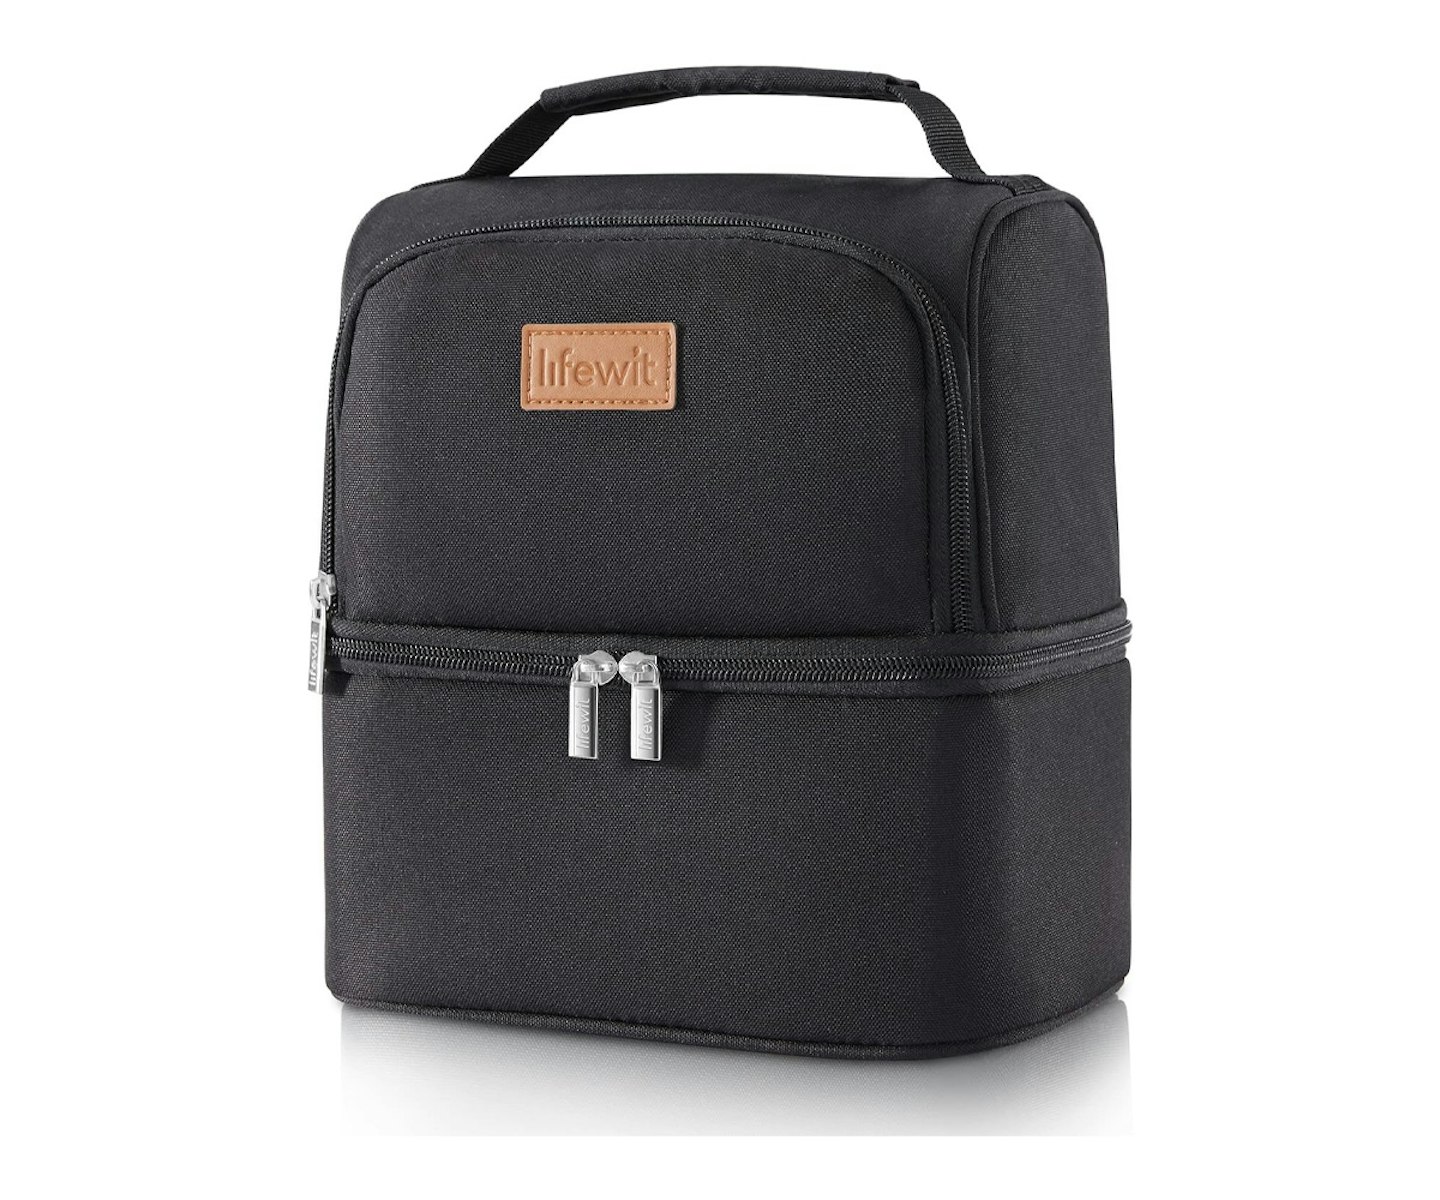 Lifewit Insulated Lunch Cooler Bag